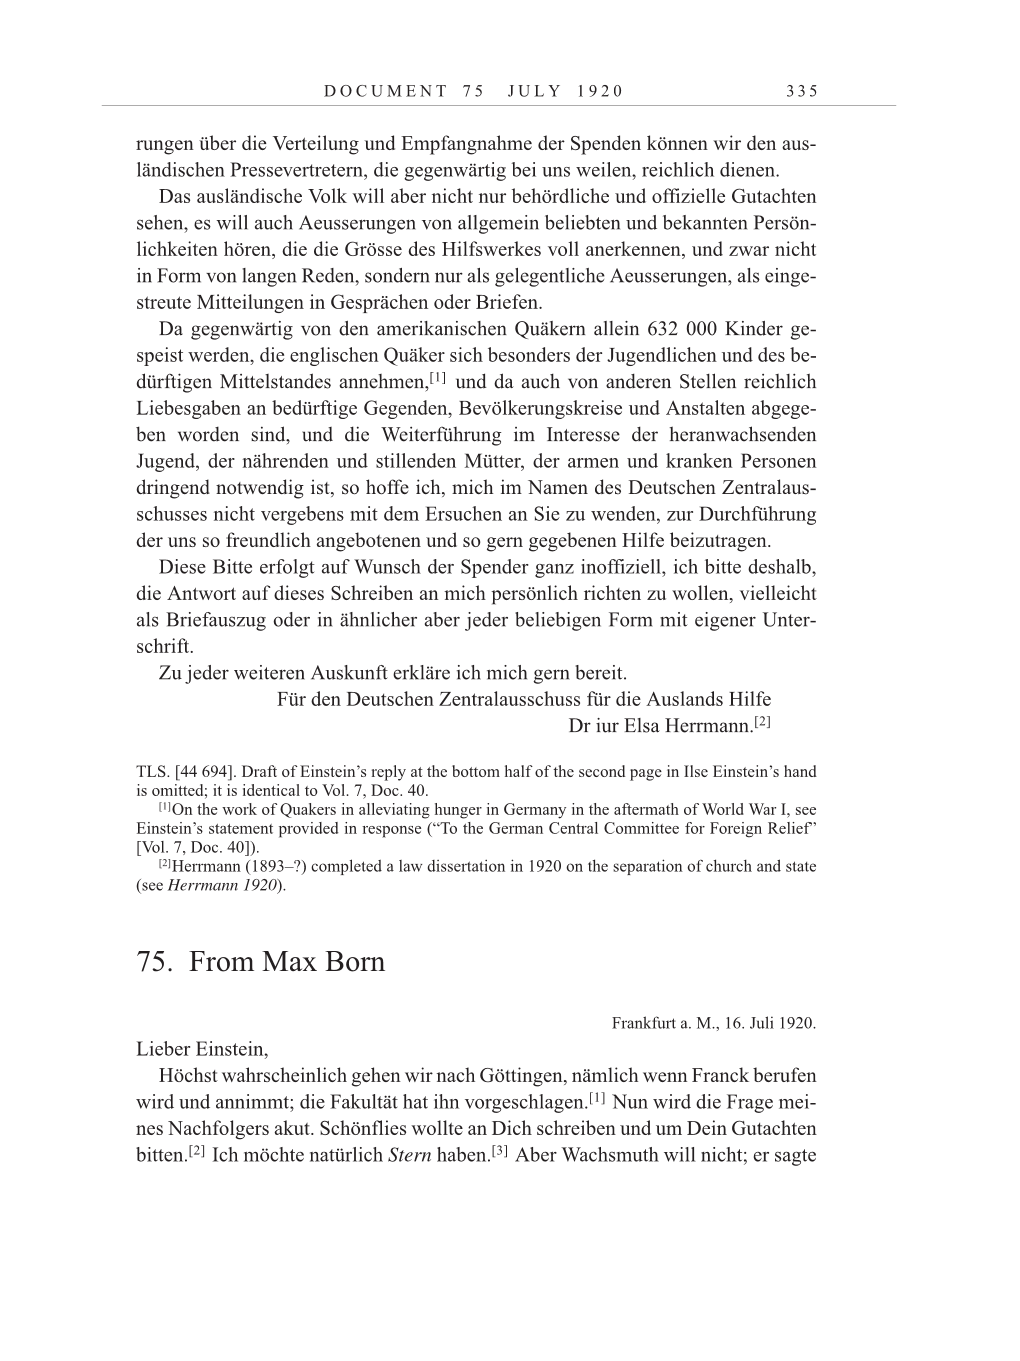 Volume 10: The Berlin Years: Correspondence May-December 1920 / Supplementary Correspondence 1909-1920 page 335